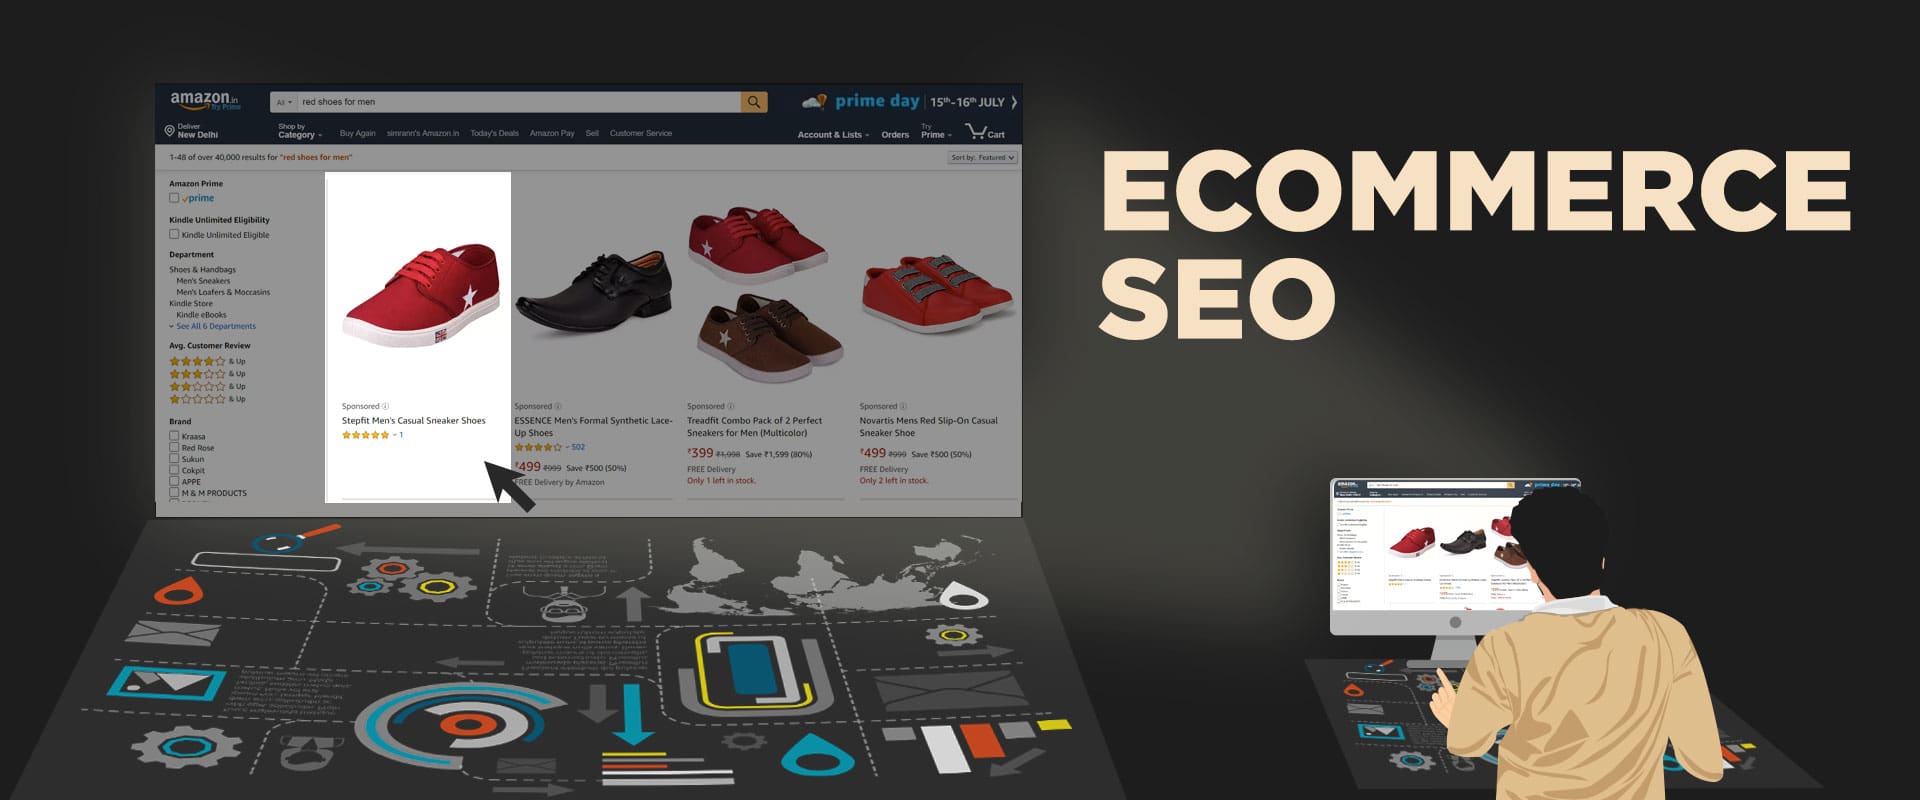 ecommerce-seo-what-is-ecommerce-seo-search-engine-optimisation-tricks-tips-techniques